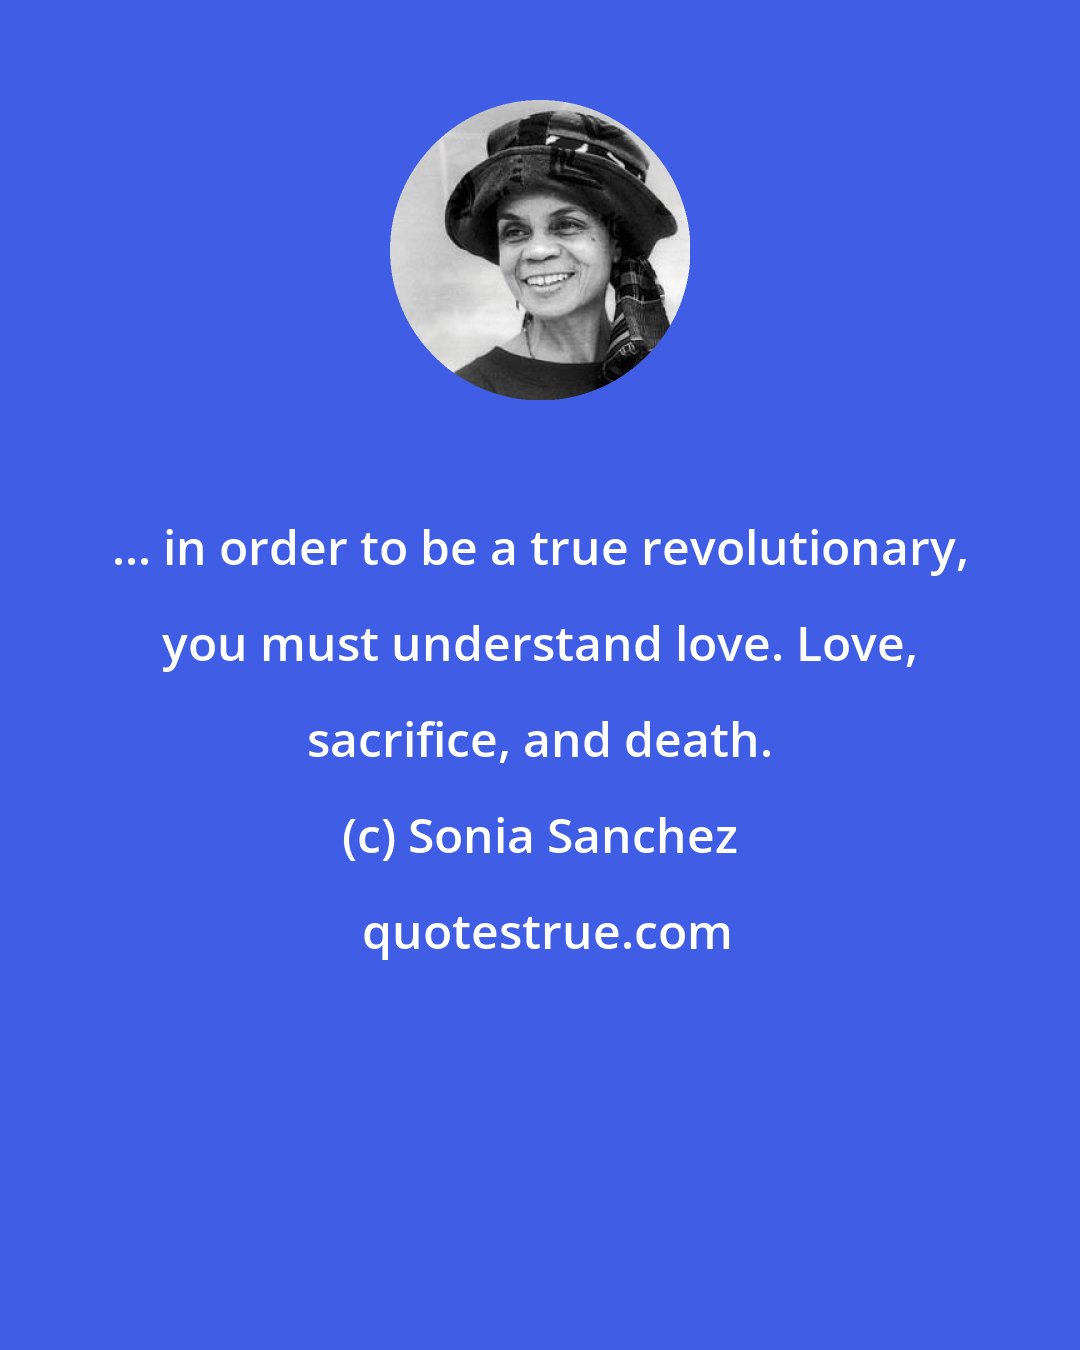 Sonia Sanchez: ... in order to be a true revolutionary, you must understand love. Love, sacrifice, and death.